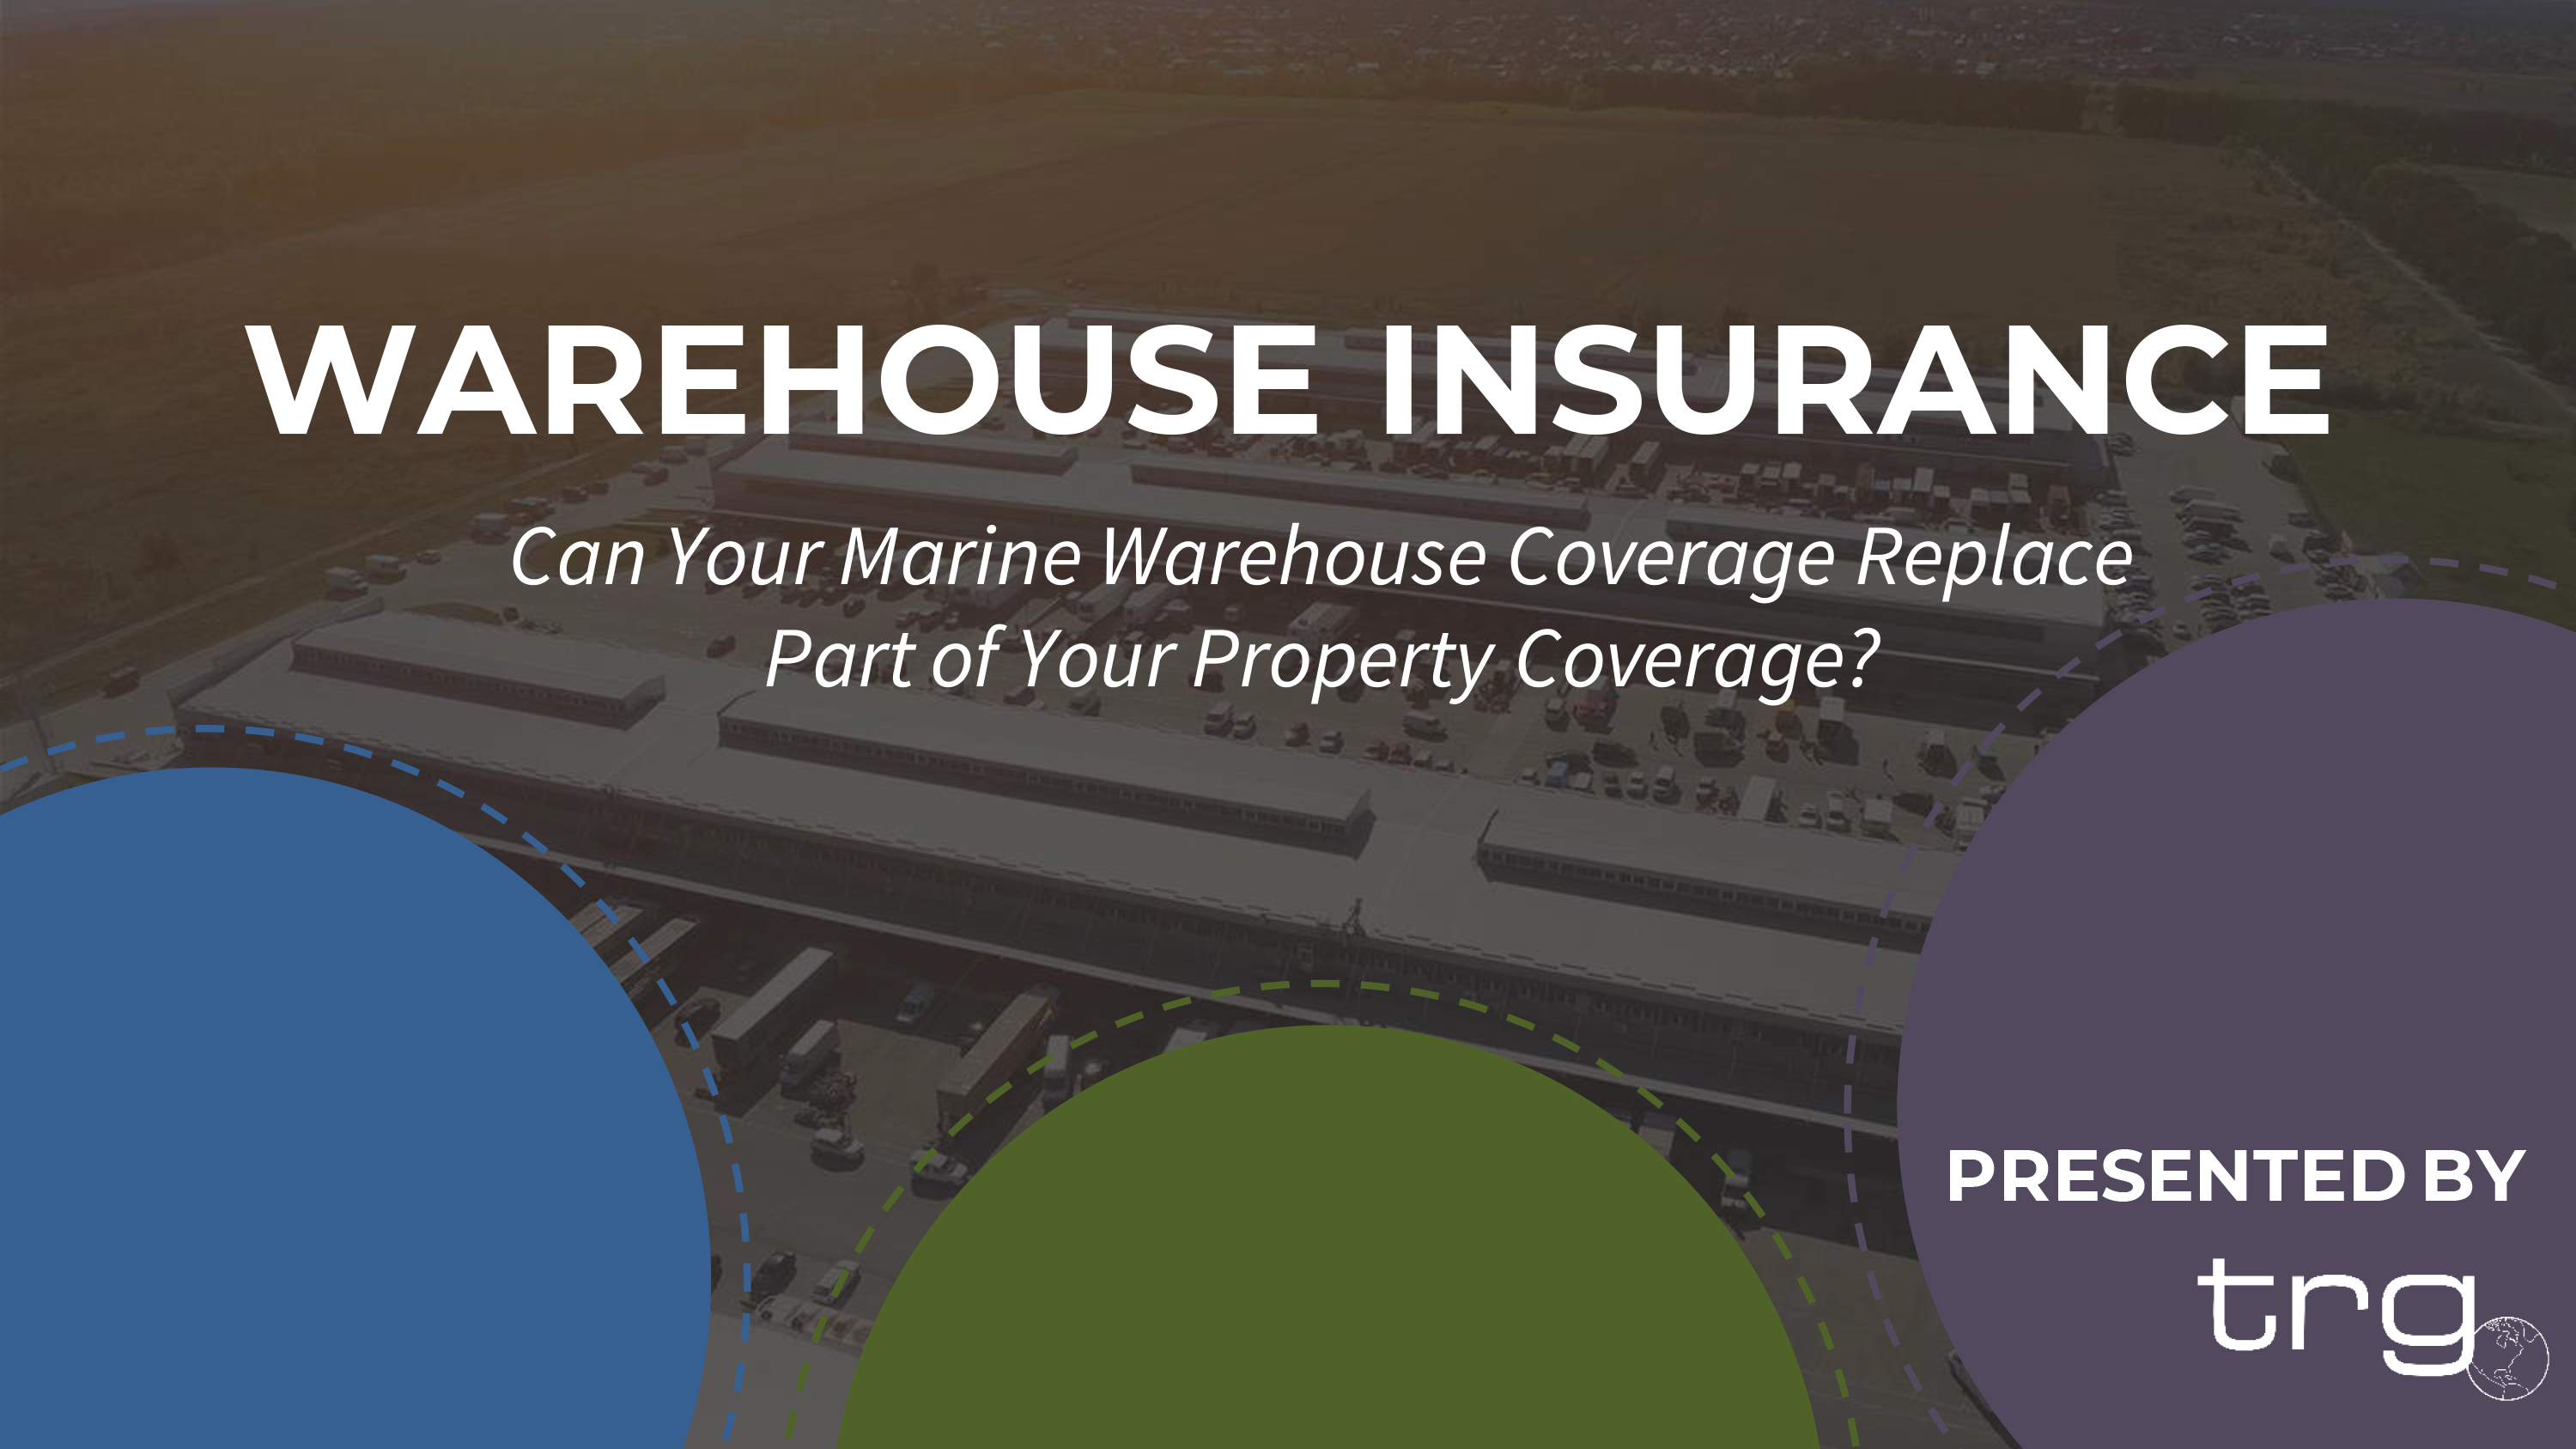 Trade Risk Guaranty hosts a webinar covering Warehouse Insurance and how to decrease the cost of your policy.